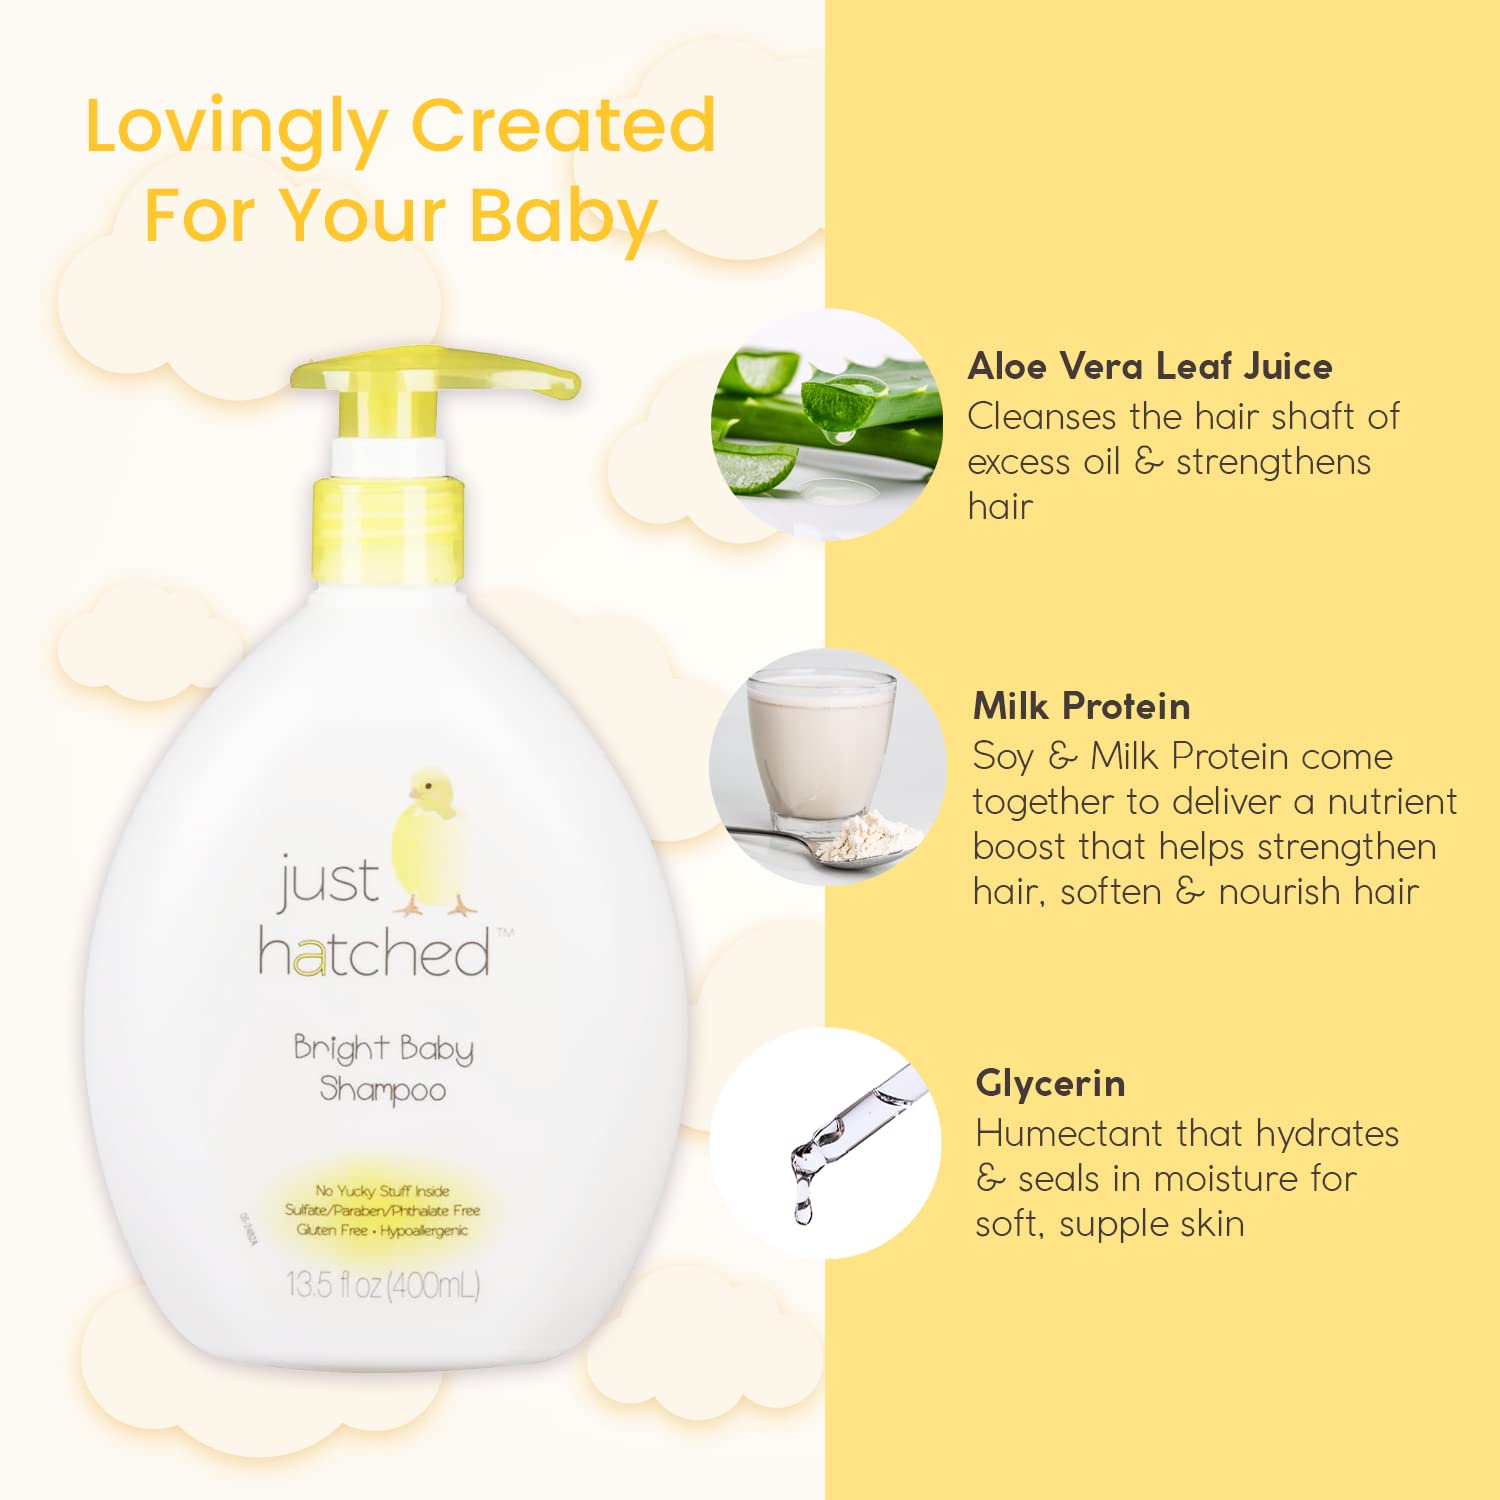 Just Hatched Bright Baby Shampoo Single-Pack - Gentle Hair Cleanser, Loveable Yummy Fragrance, Gentle for Newborns, Hypoallergenic, Gluten Free, No Yucky Stuff & Harsh Ingredients, 13.5 fl oz (1 Pack)